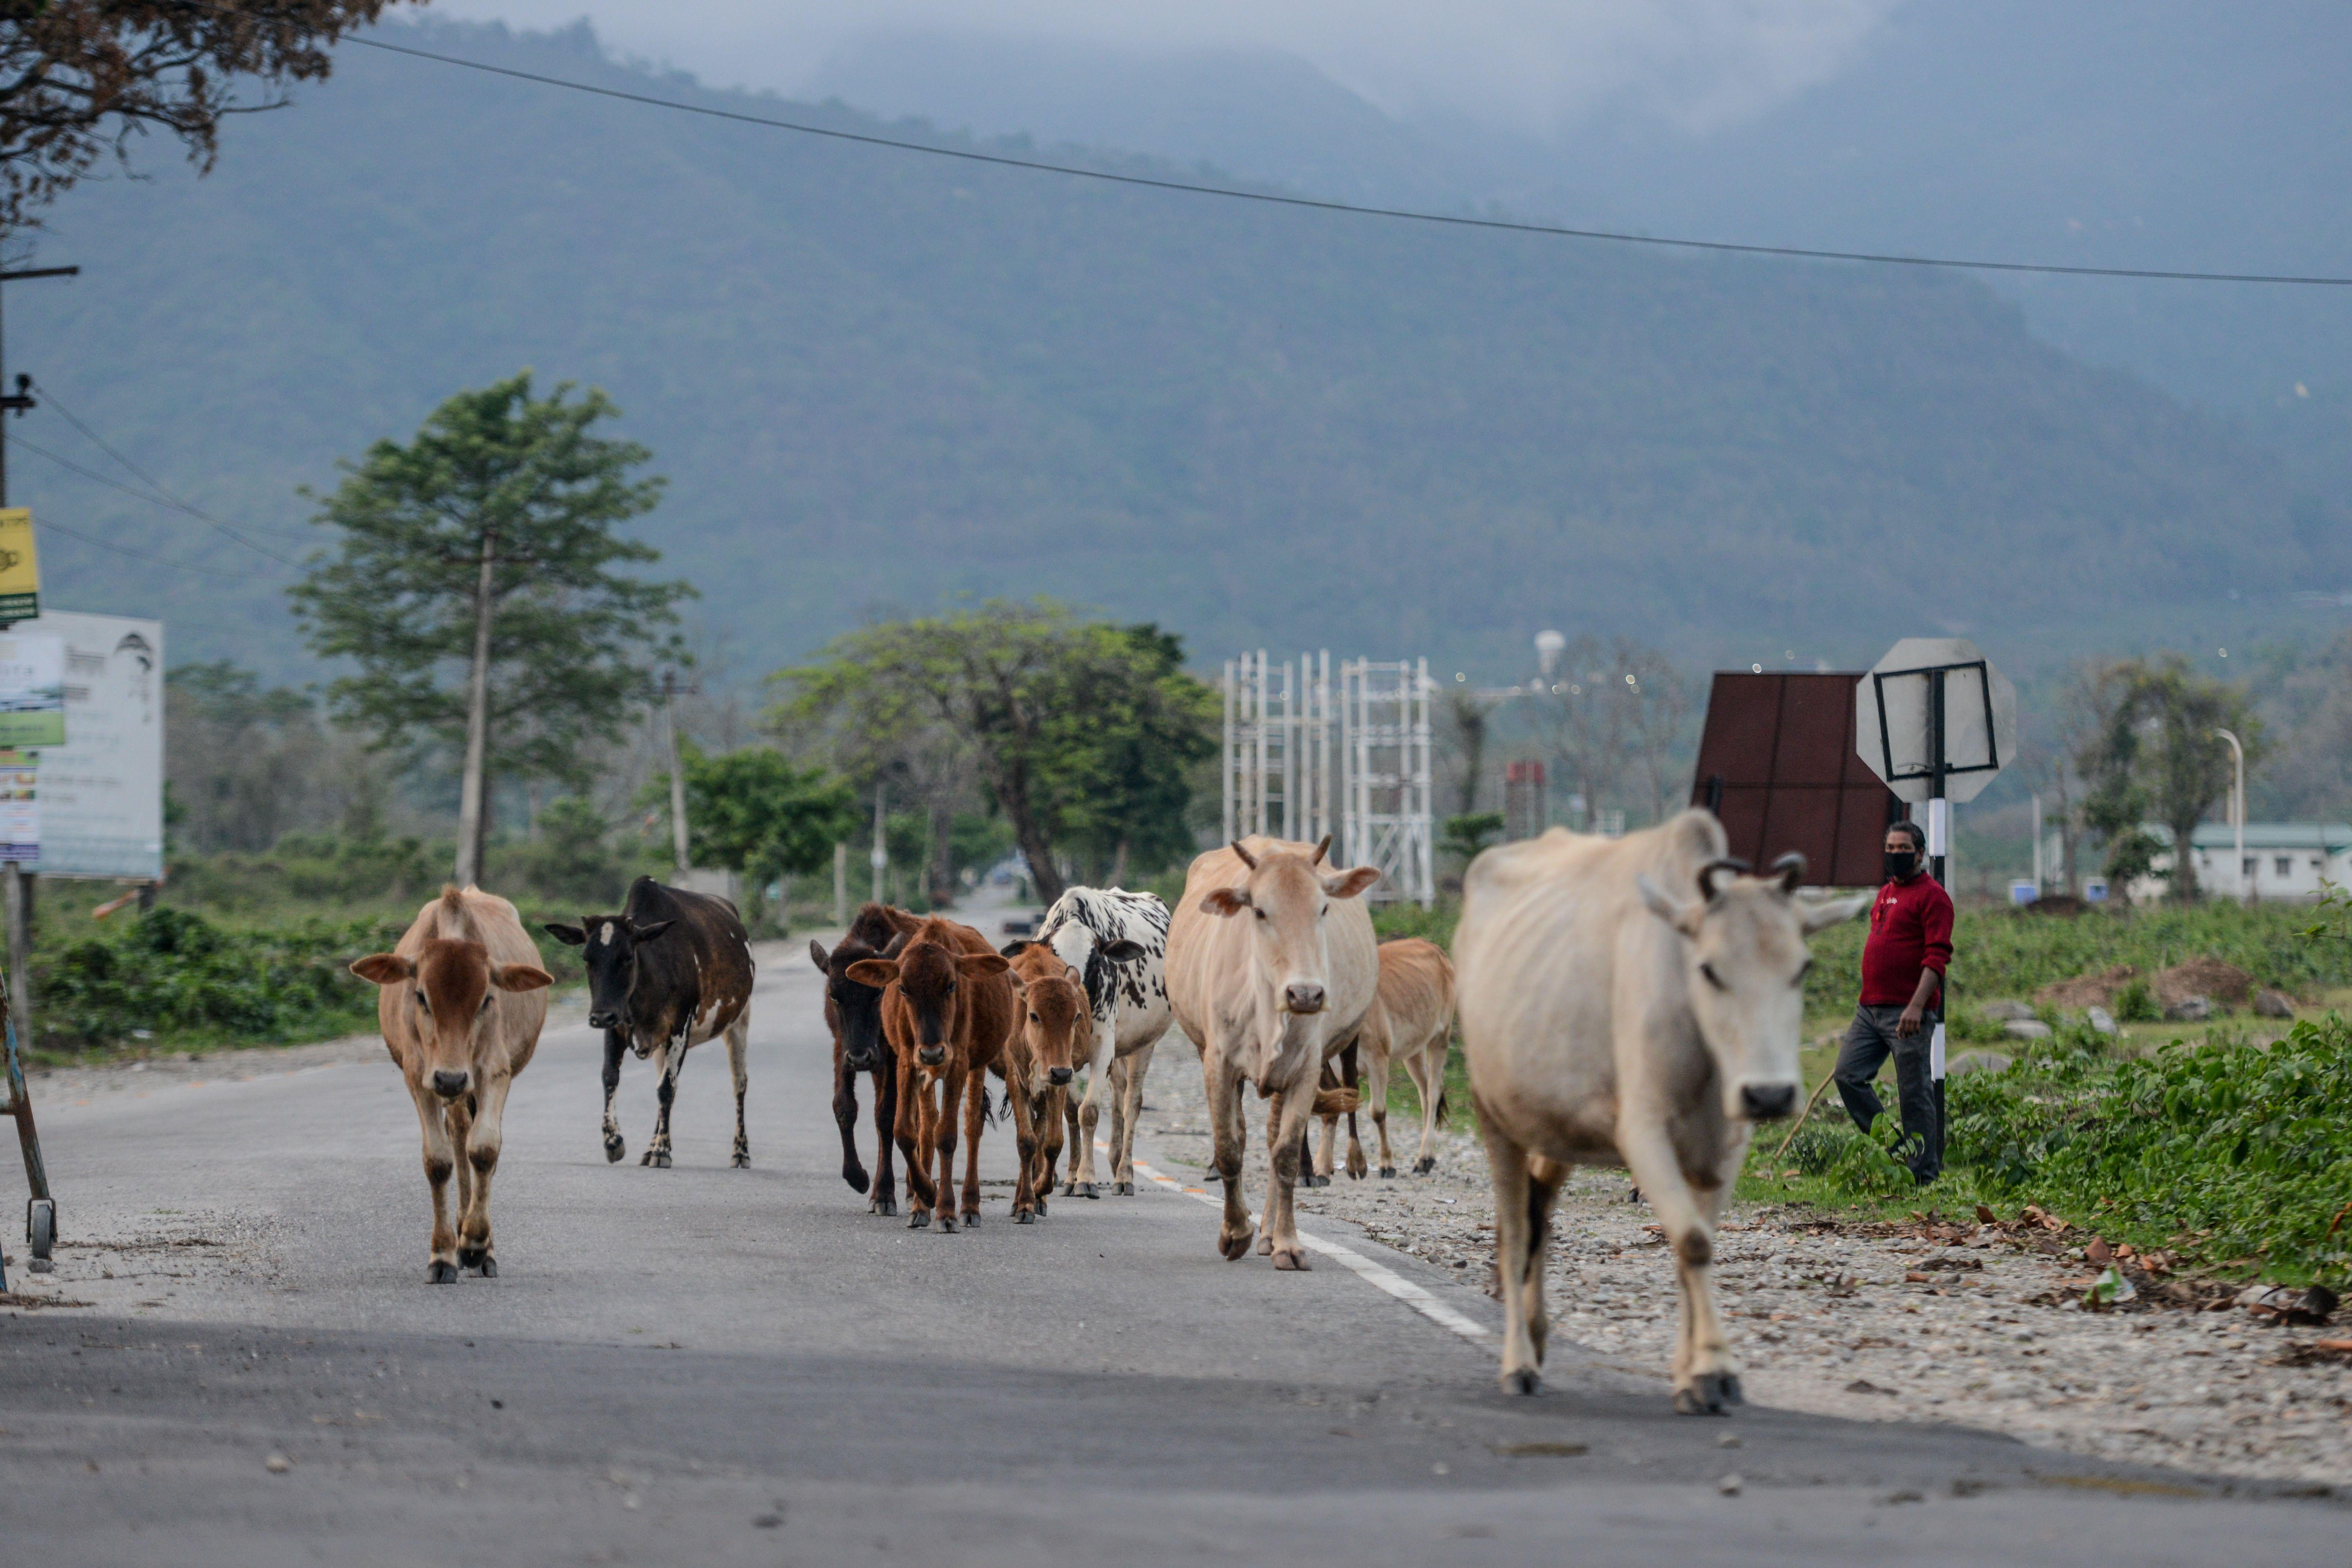 A man walks with several cows along a road.